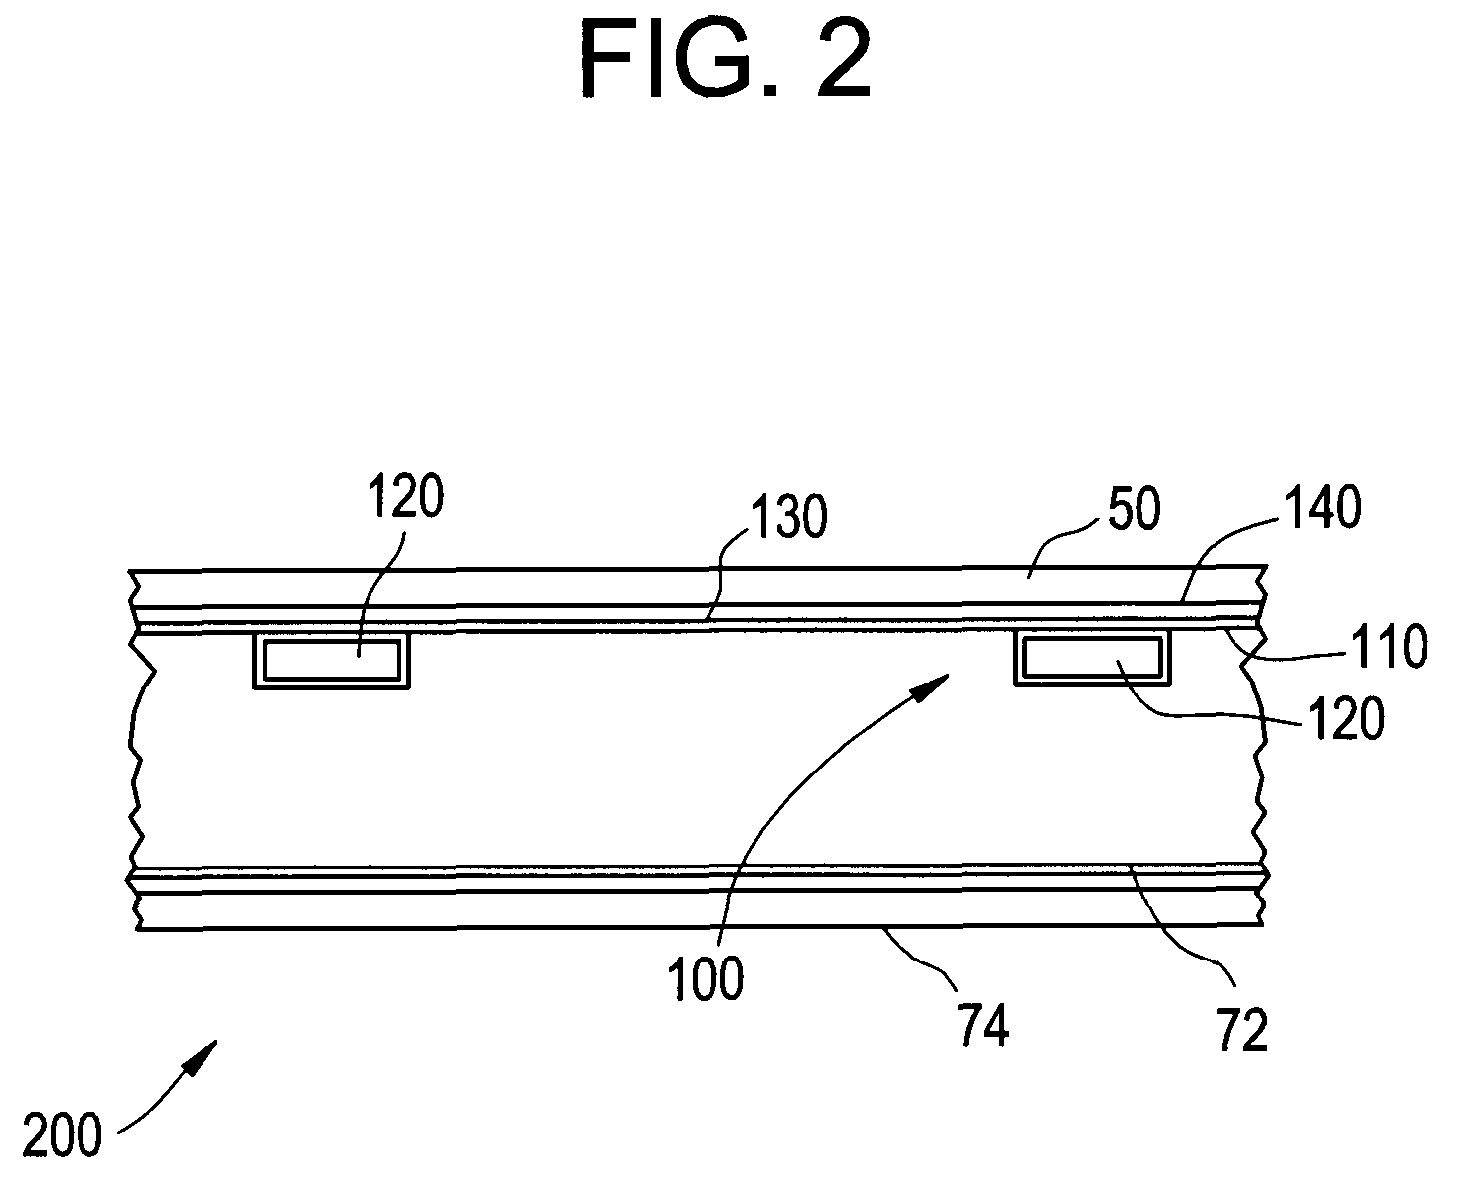 Gradient bore cooling providing RF shield in an MRI system